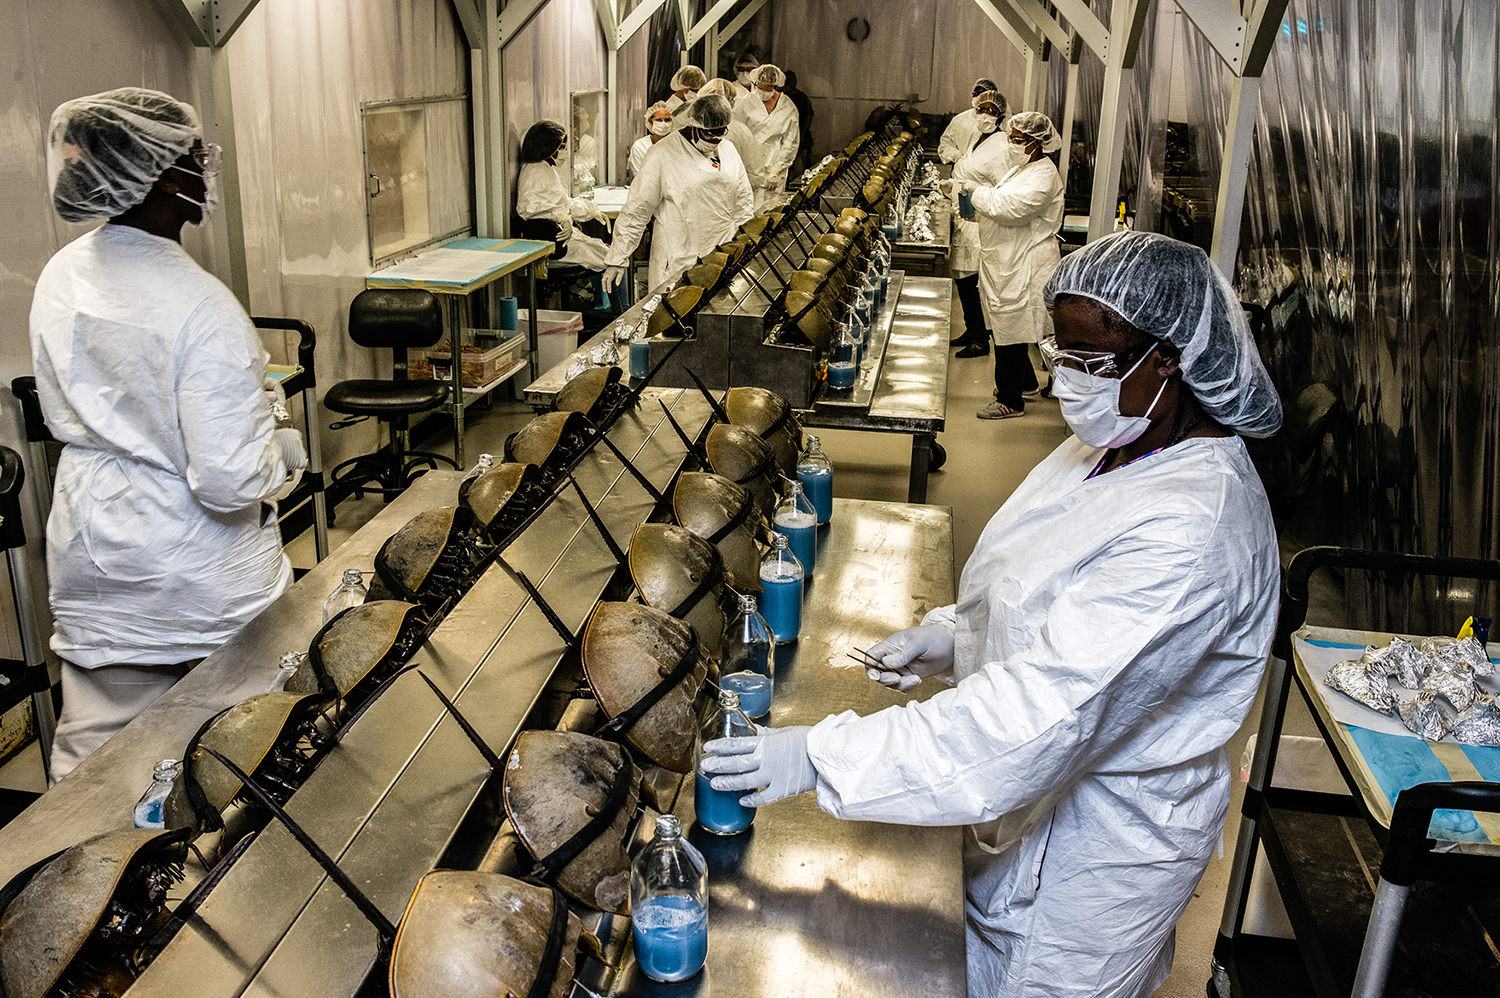 Charles River Laboratories in Charleston, South Carolina, is one facility that collects horseshoe crab blood, which appears blue upon air exposure. Photo by Timothy Fadek